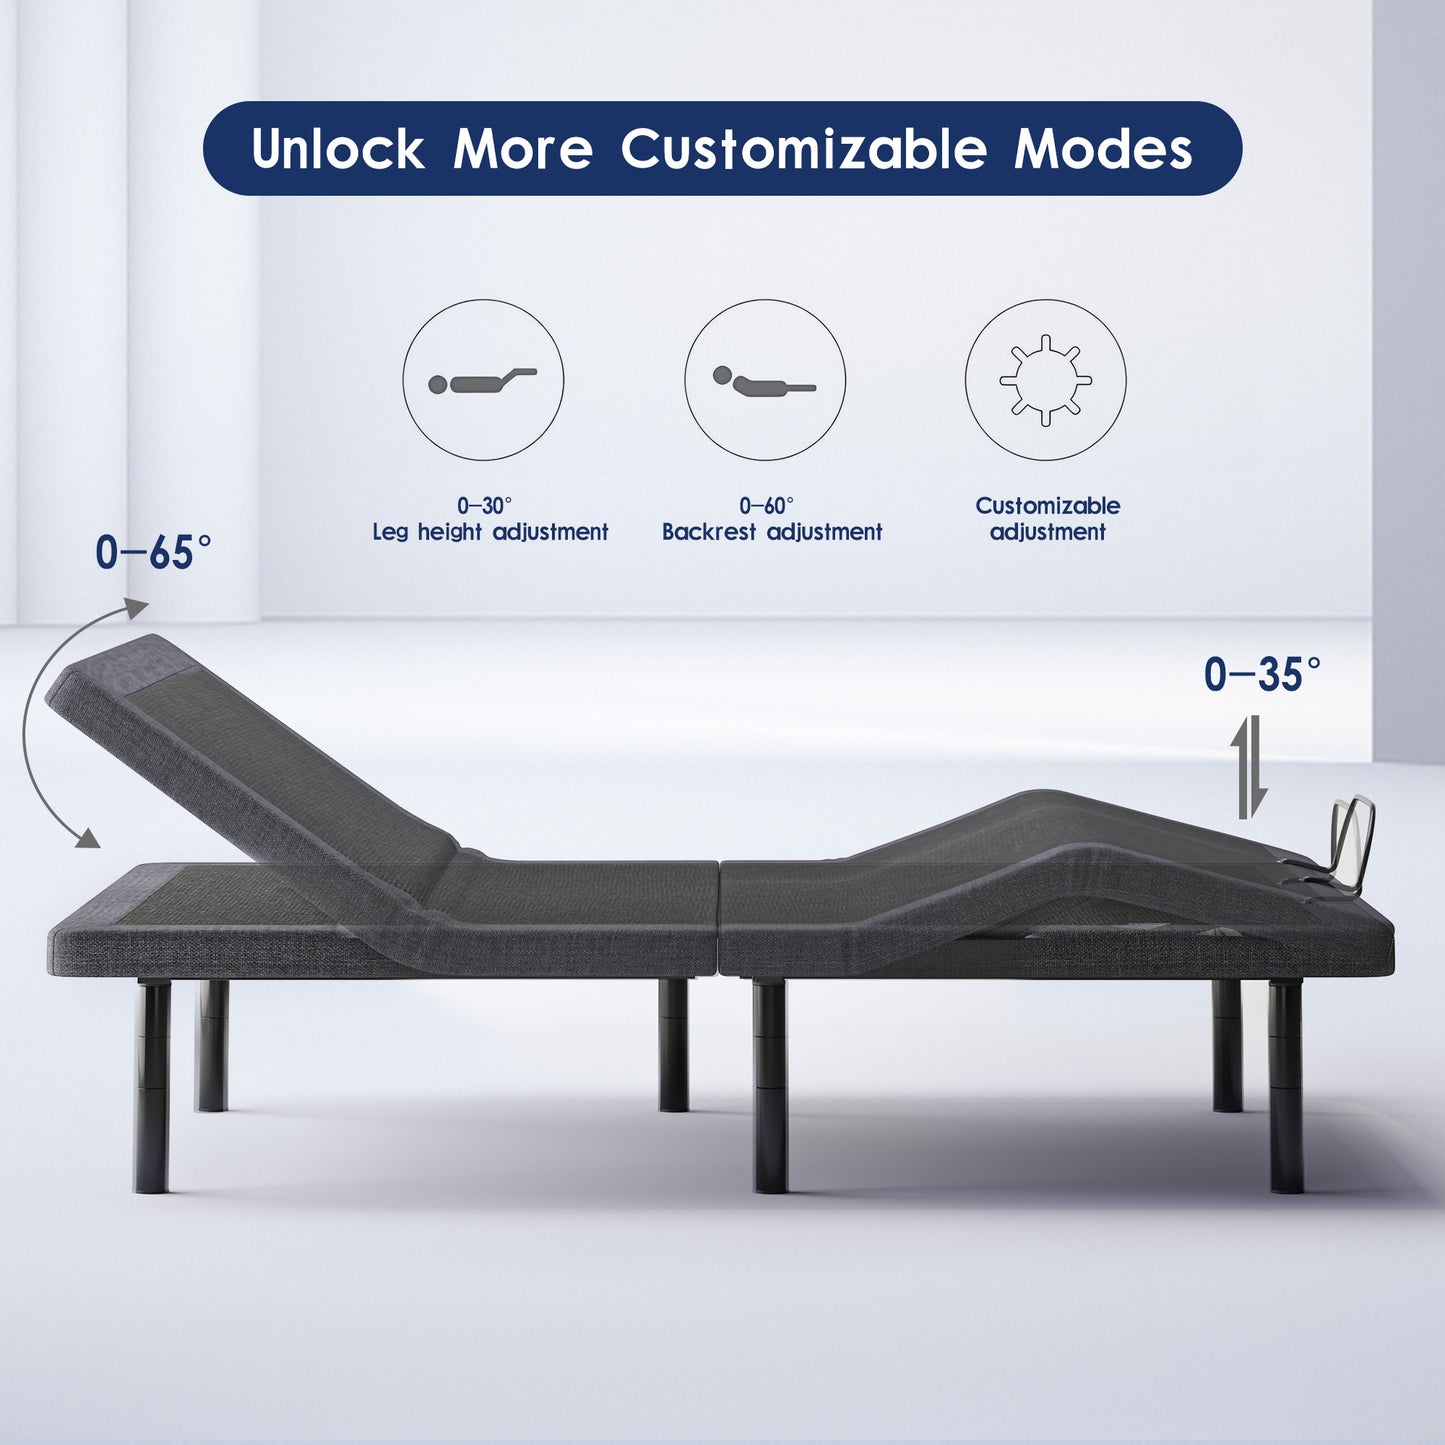 SogesPower Queen Size Adjustable Bed Base: Massage,USB Ports, Nightlight & More